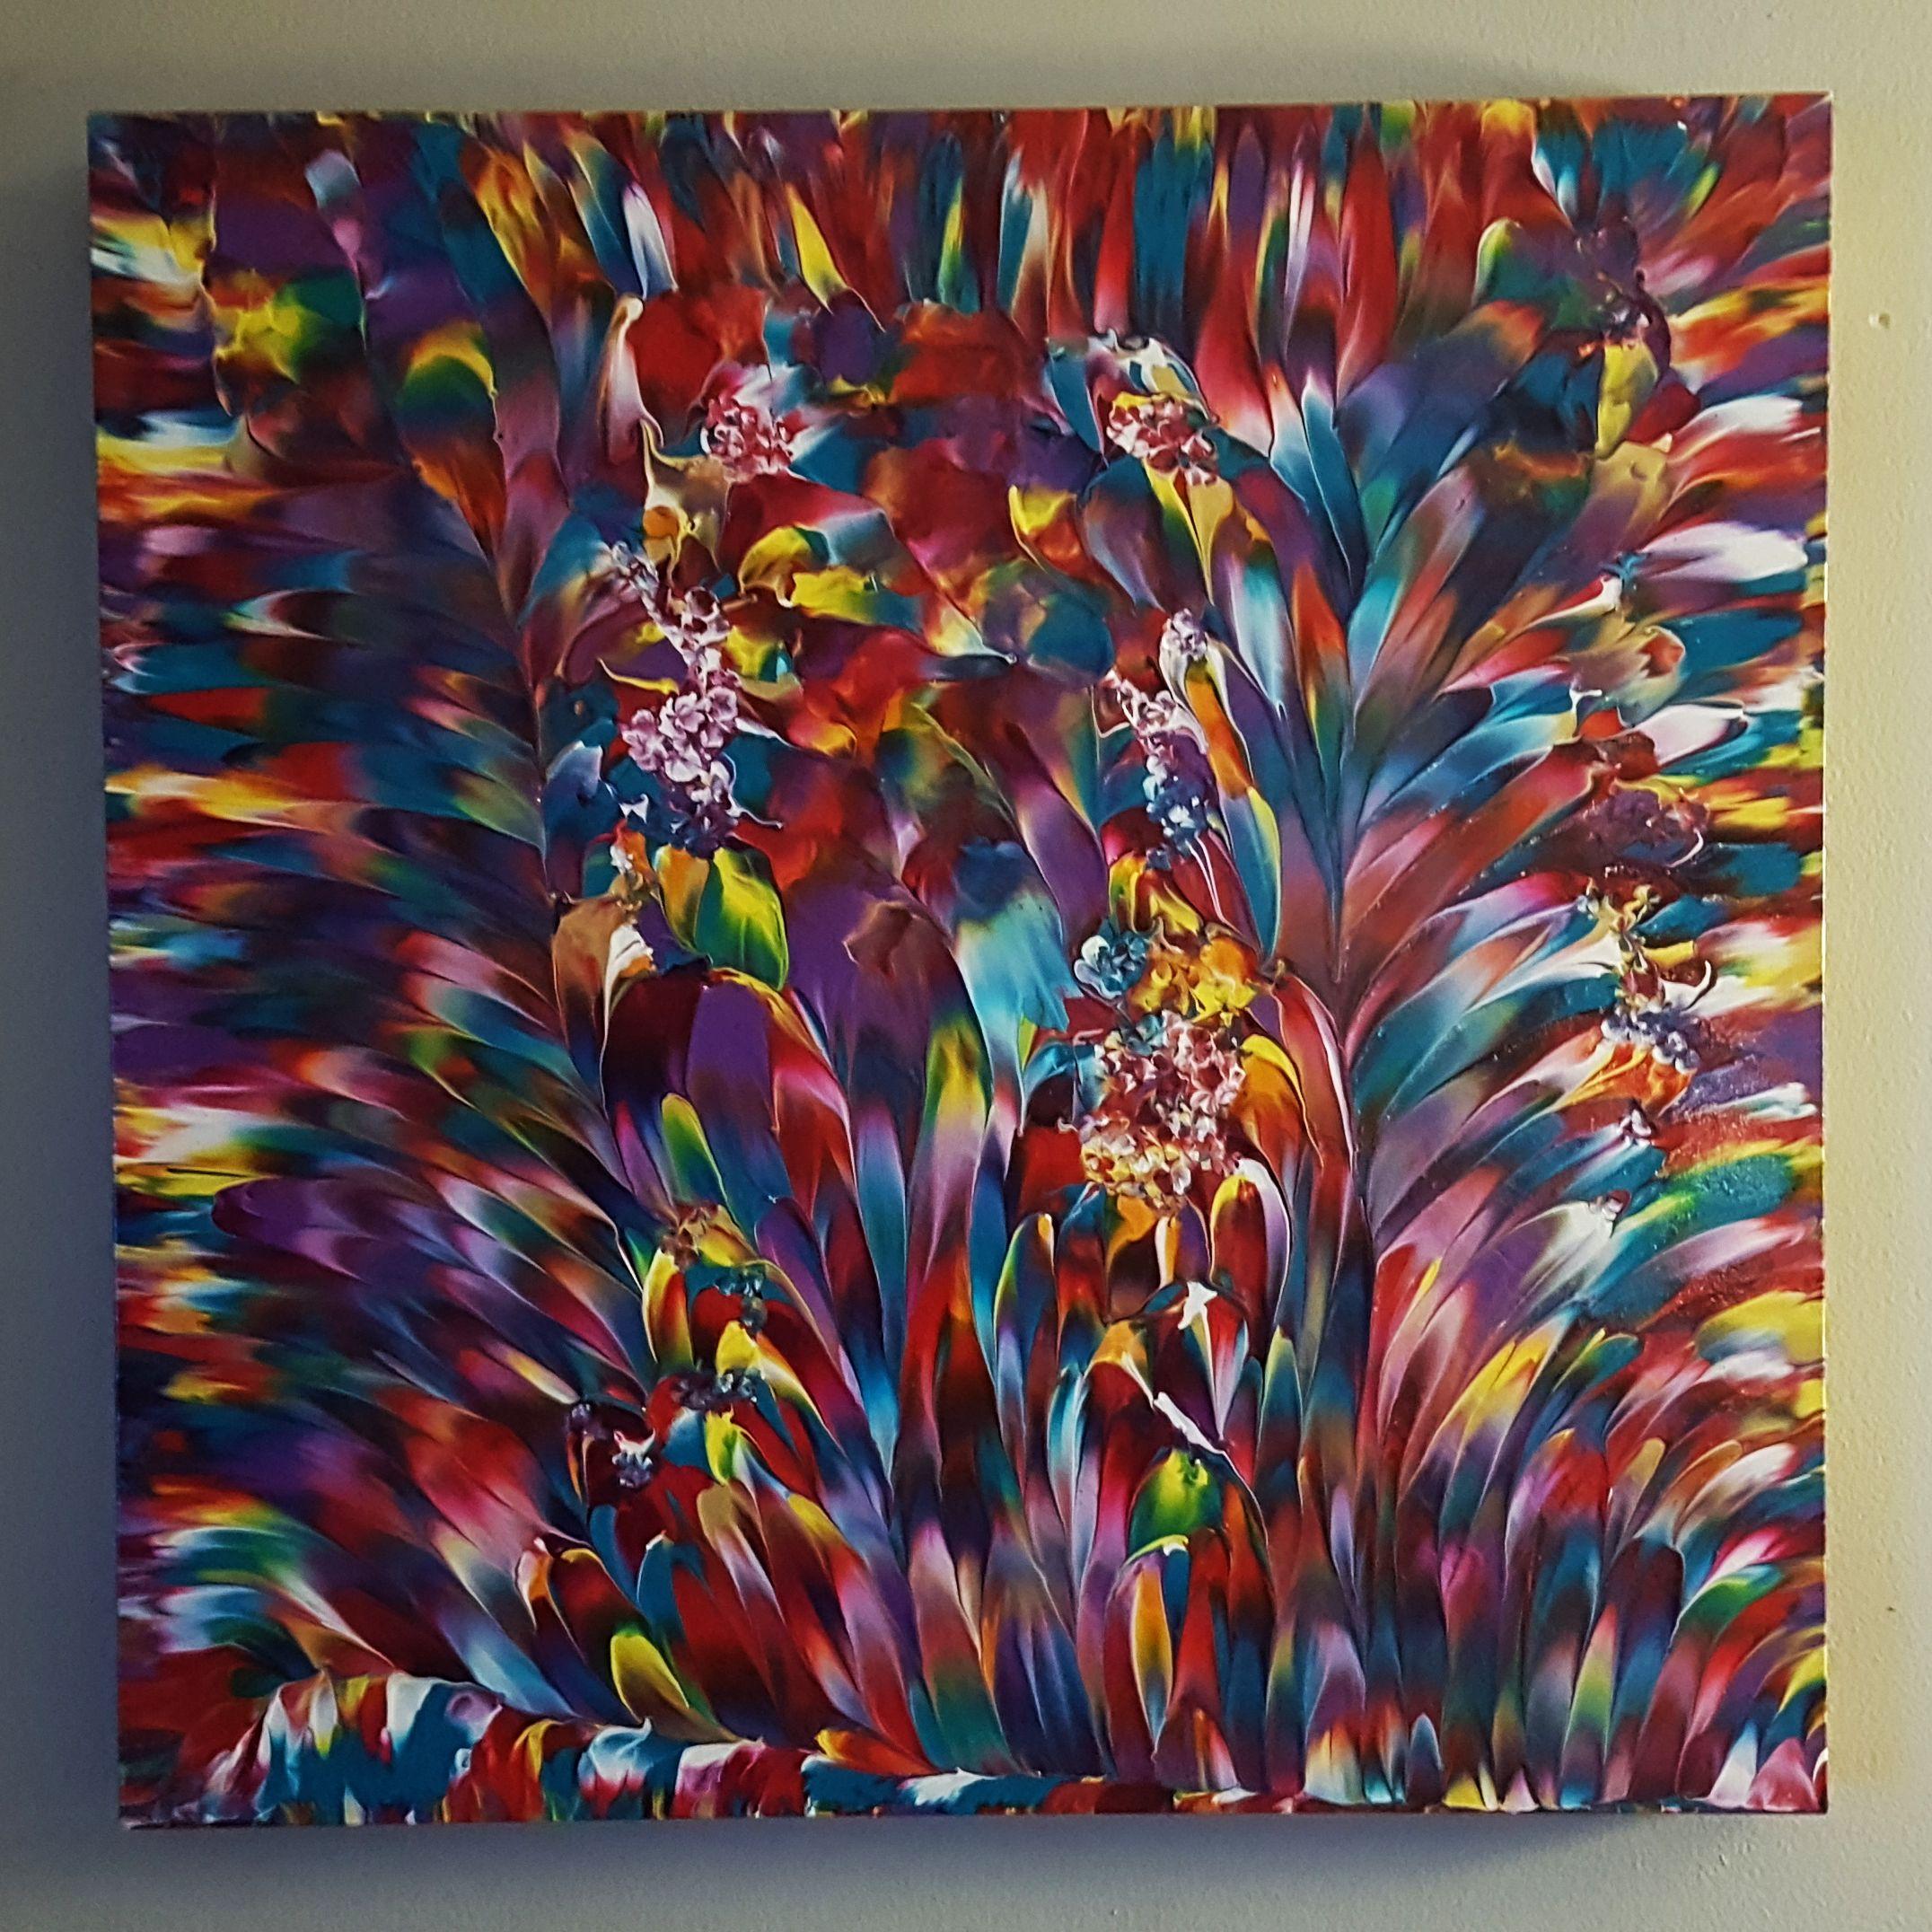 Joy of Life is a bold abstract painting with vibrant colours that radiate a warm and positive feeling; my expression of joy for all the beauty in the world. Unique, one-of-a-kind, modern statement piece that will brighten up those cold and dark